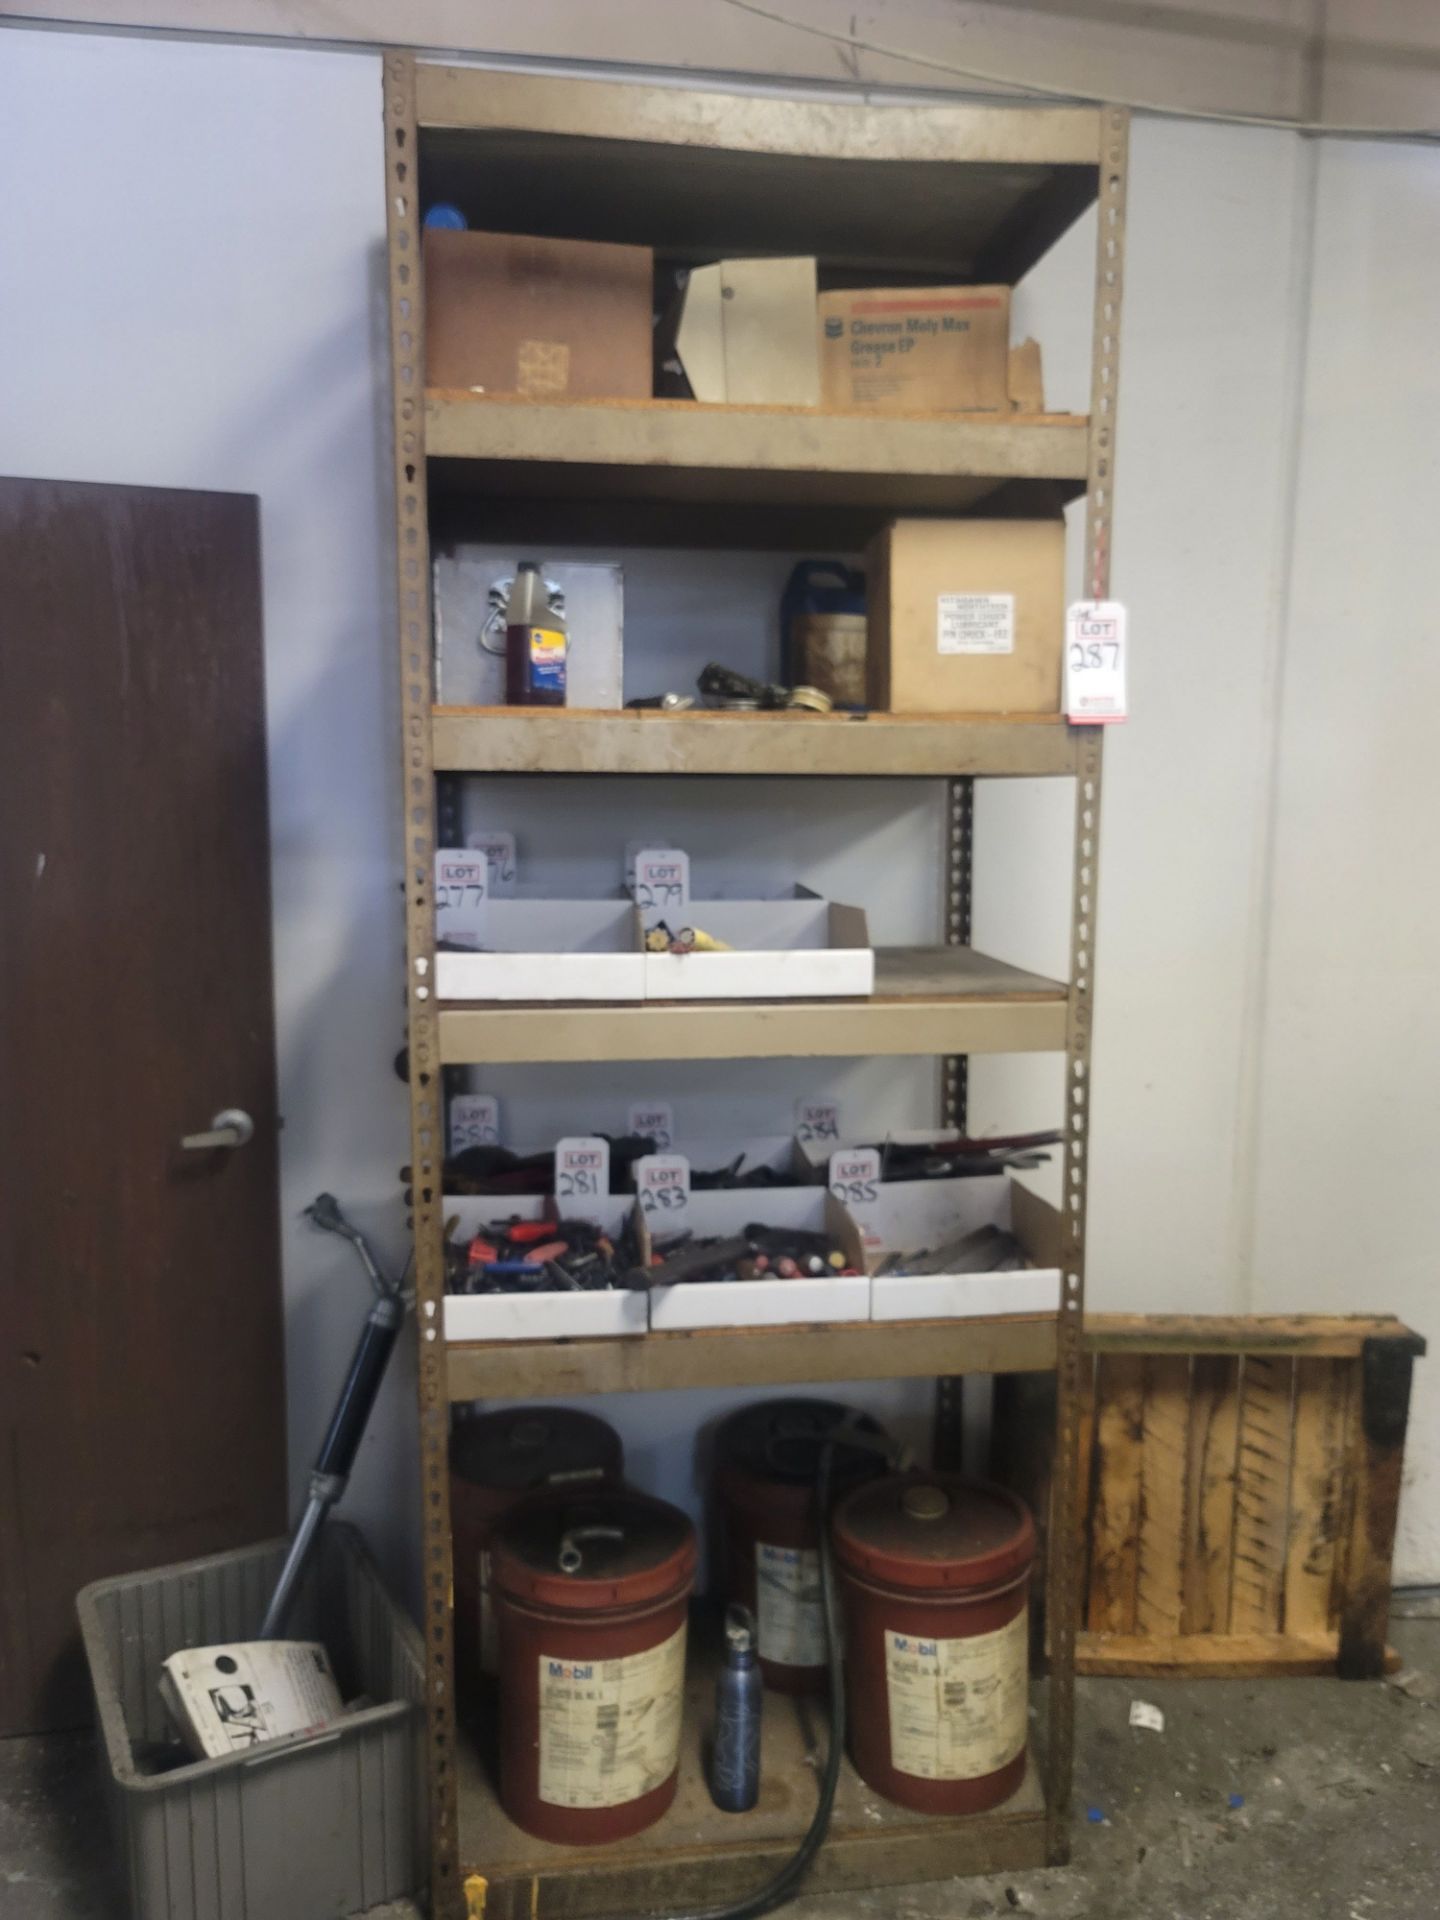 STEEL SHELF UNIT W/ PARTICLE BOARD SHELVES, 3' X 2' X 8', CONTENTS NOT INCLUDED